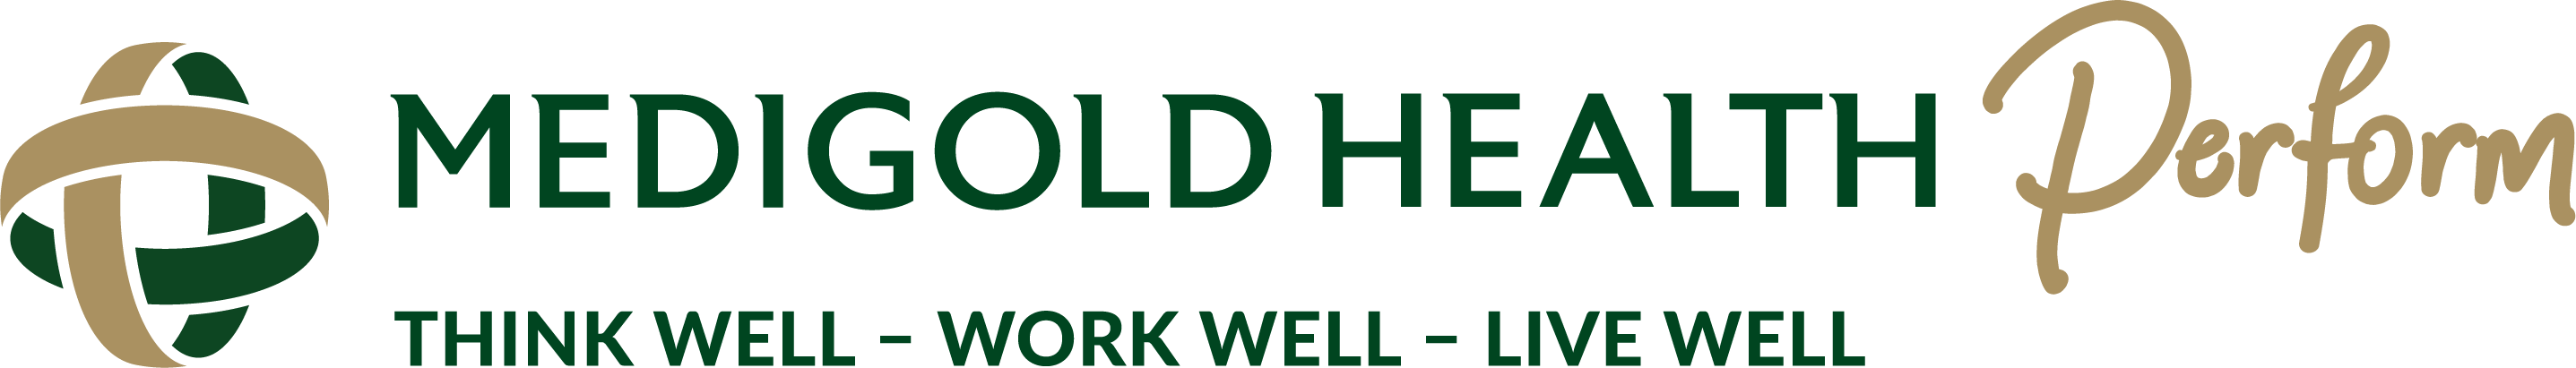 Introducing Medigold Health Perform - Mental Health and Wellbeing Services